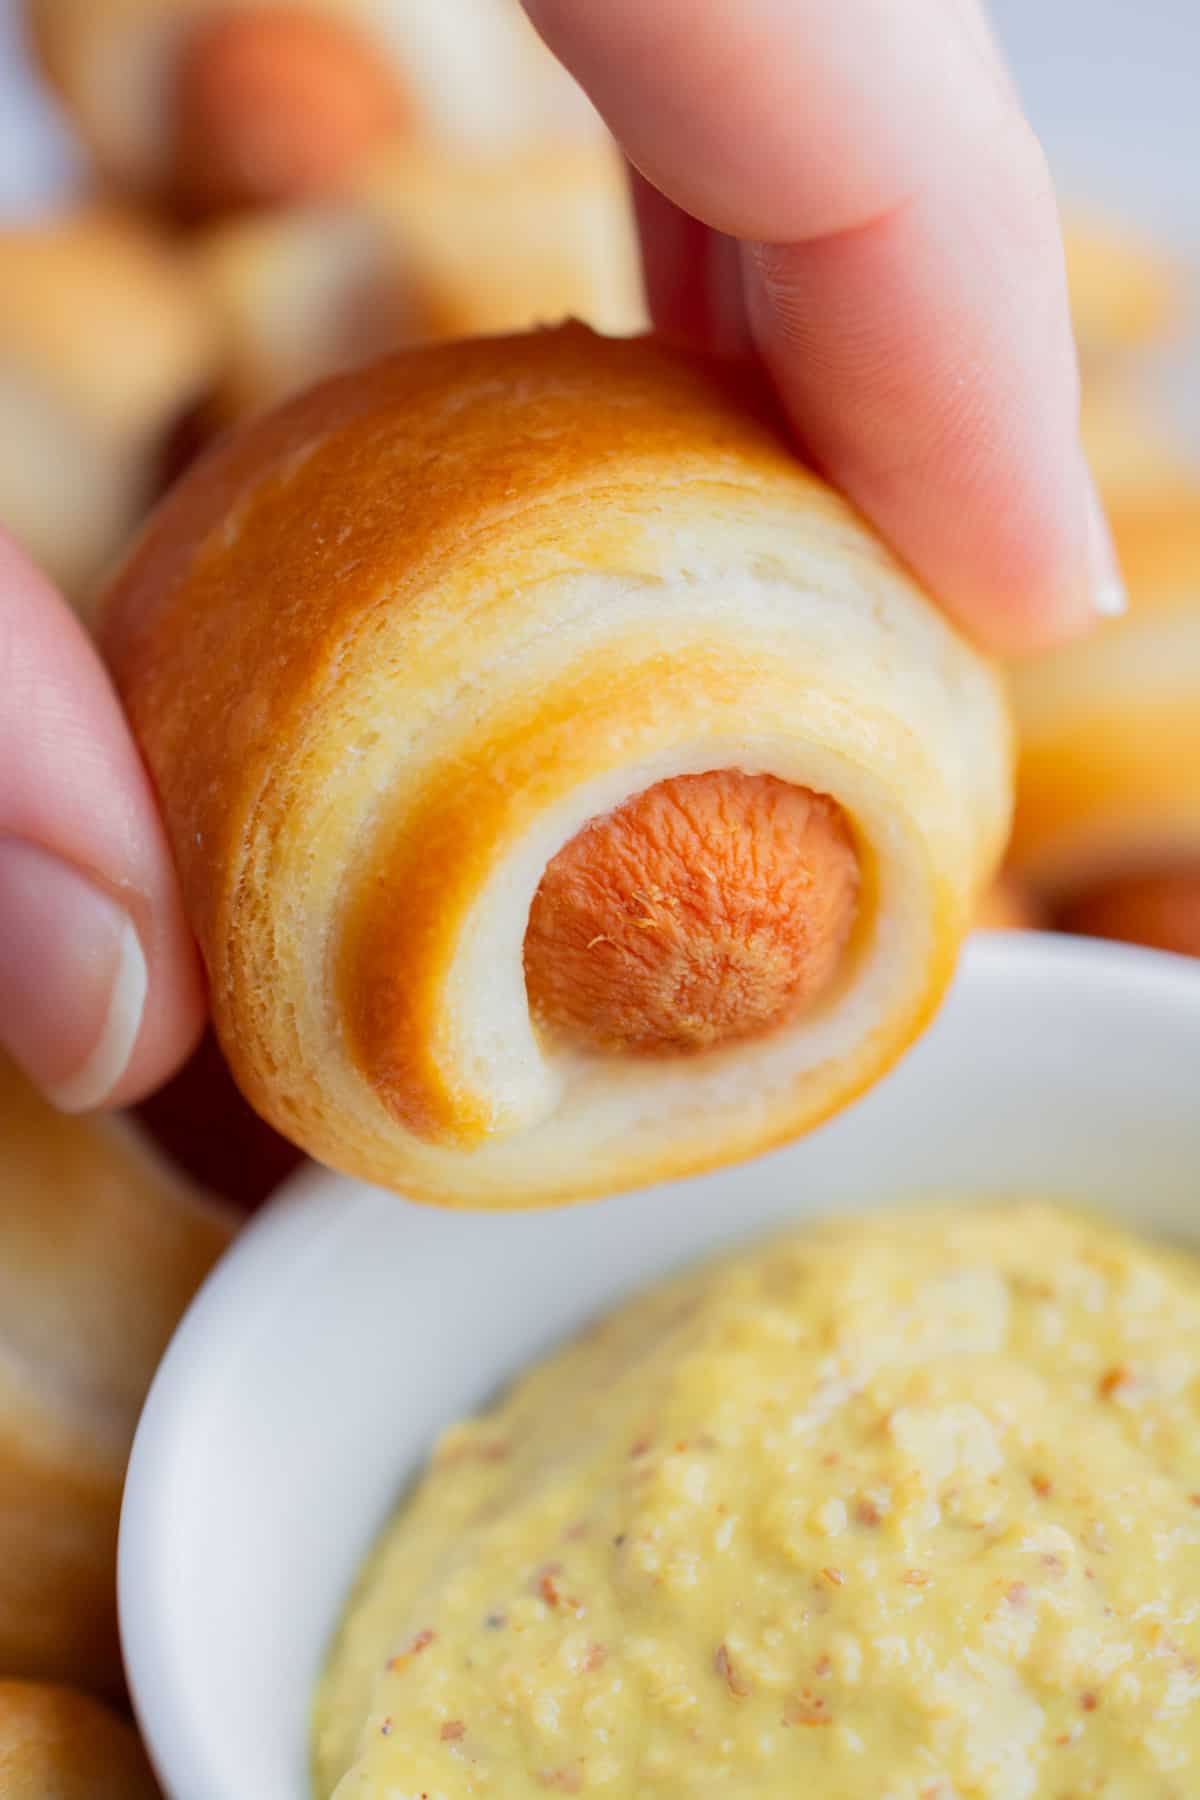 Two fingers holding a mini vegan crescent dog ready to dip it in mustard.